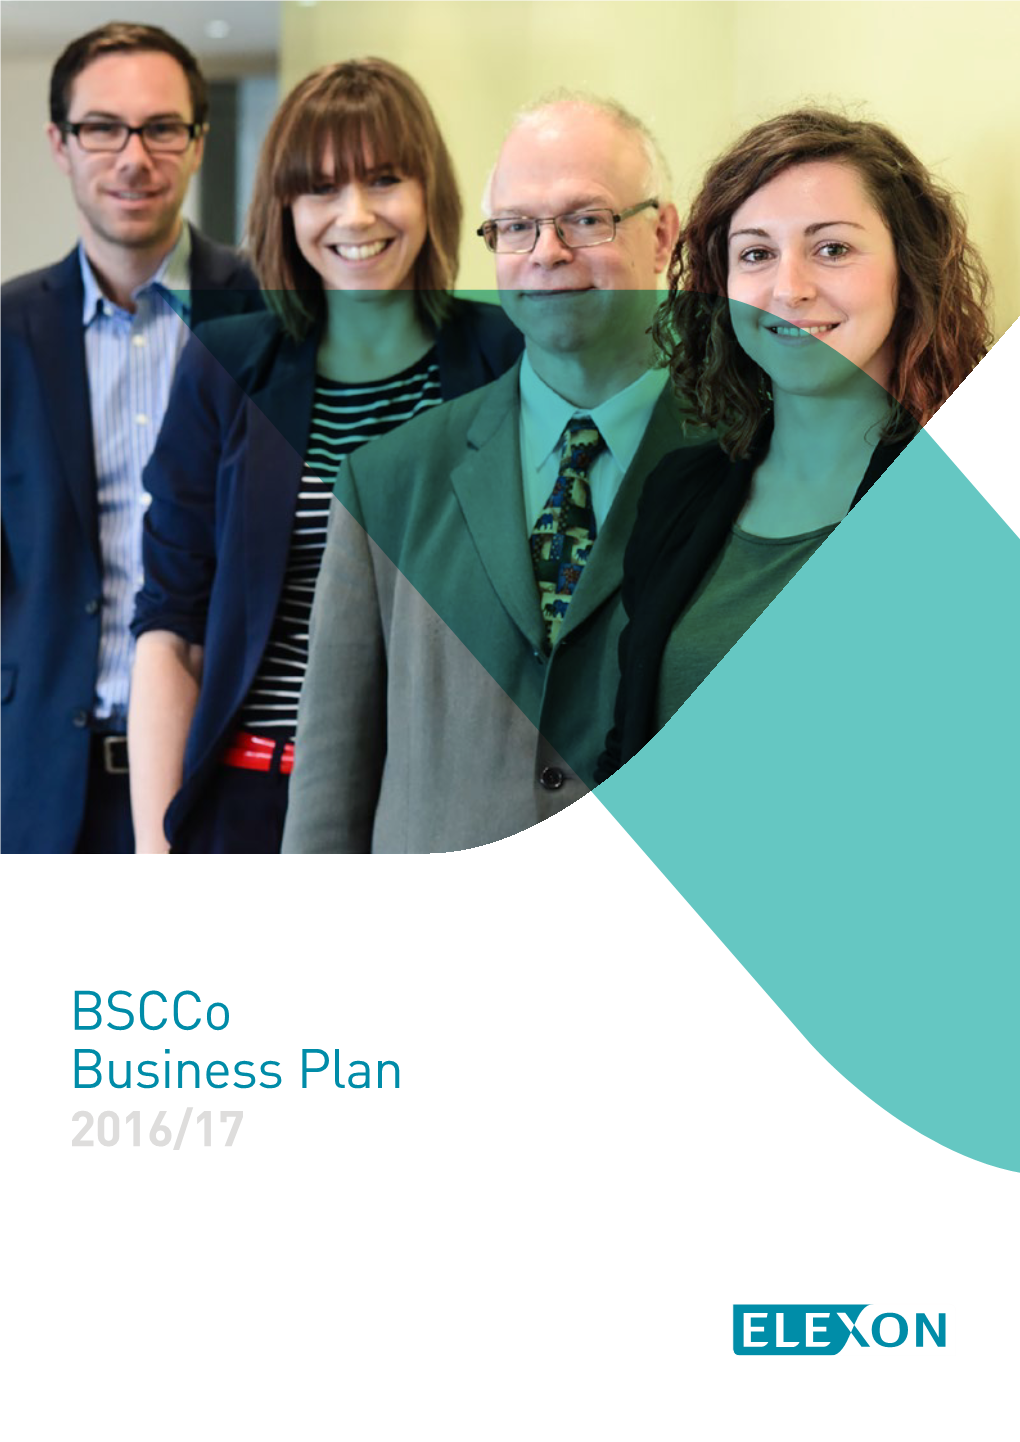 Business Plan 2016/17 FOREWORD Bscco Business Plan 2016/17 2